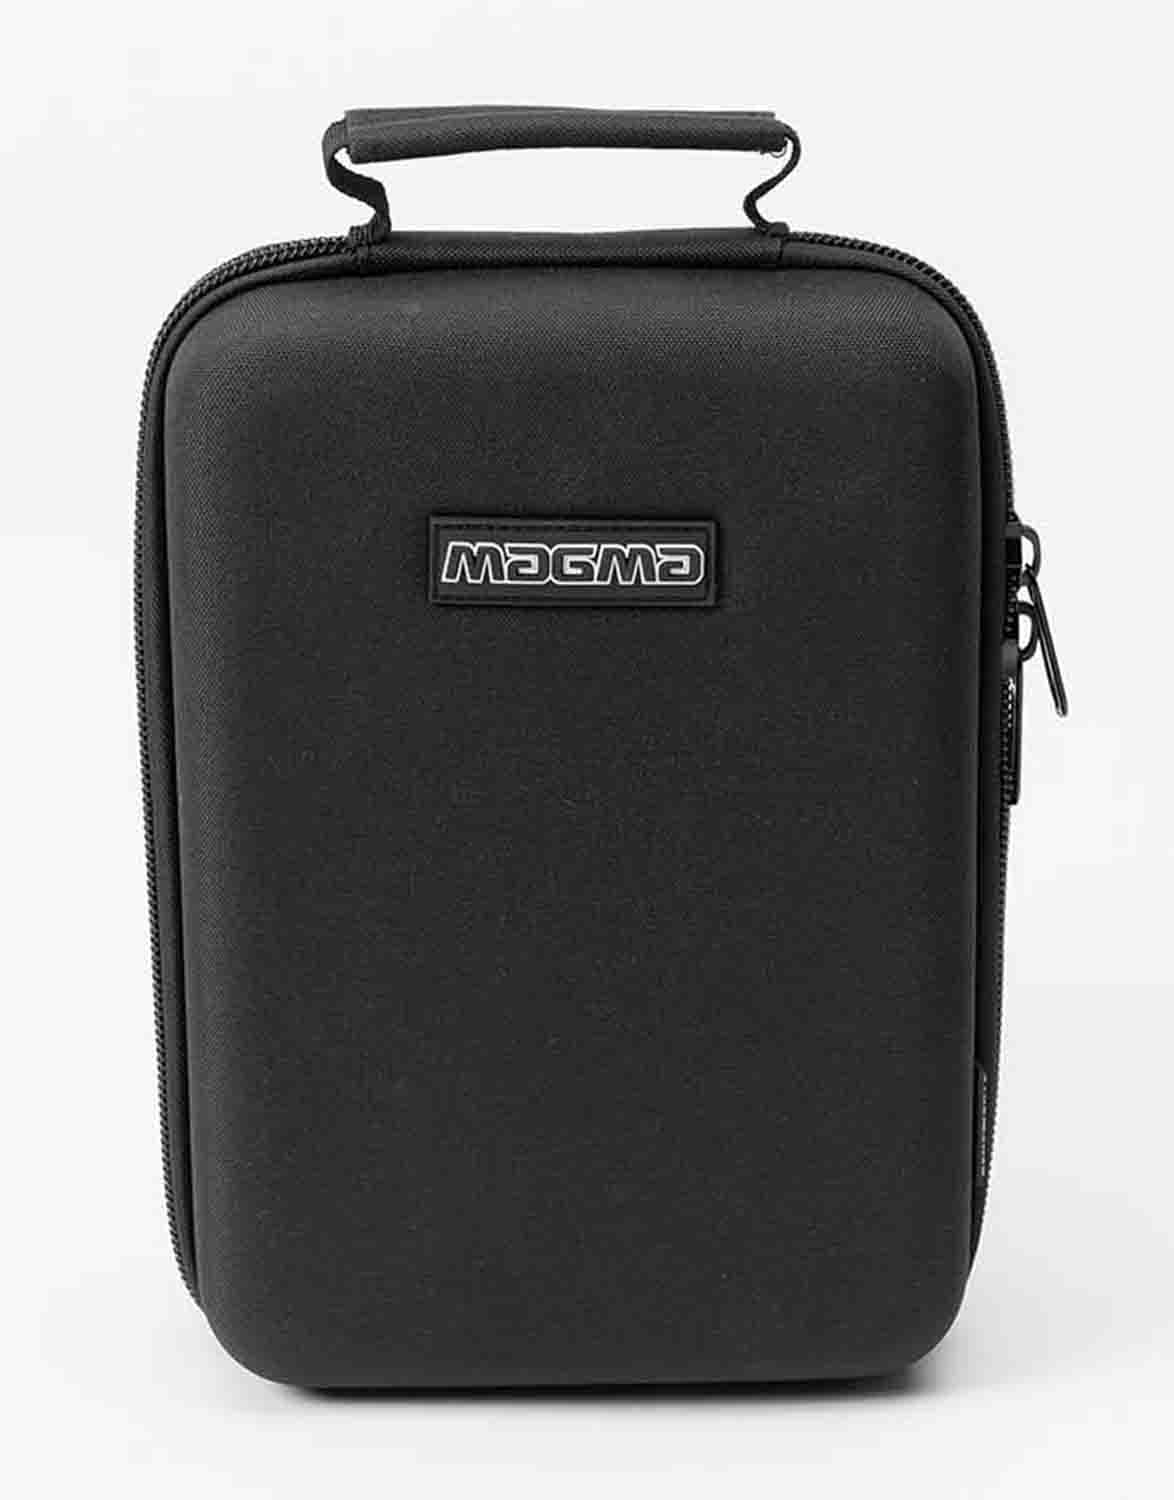 B-Stock: Magma MGA48015 Controller Case For Roland SP-404 - Hollywood DJ